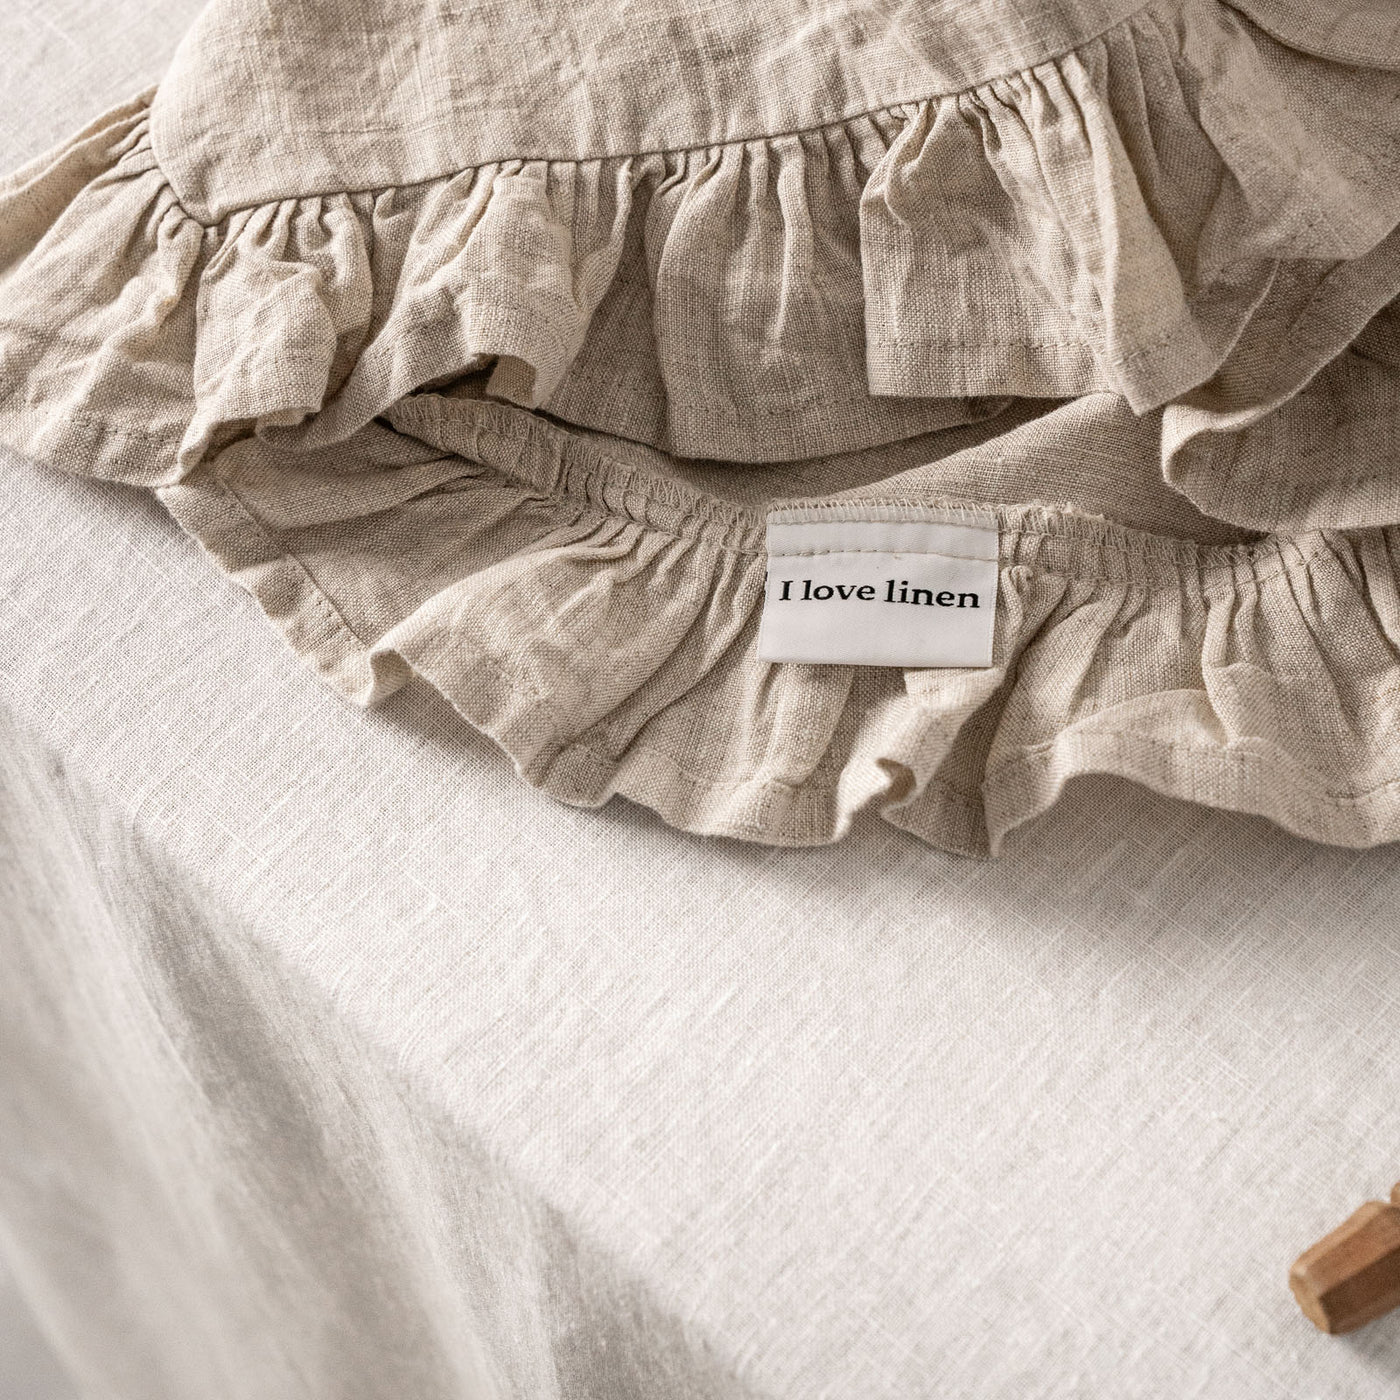 French Flax Linen Ruffles Napkins in Natural